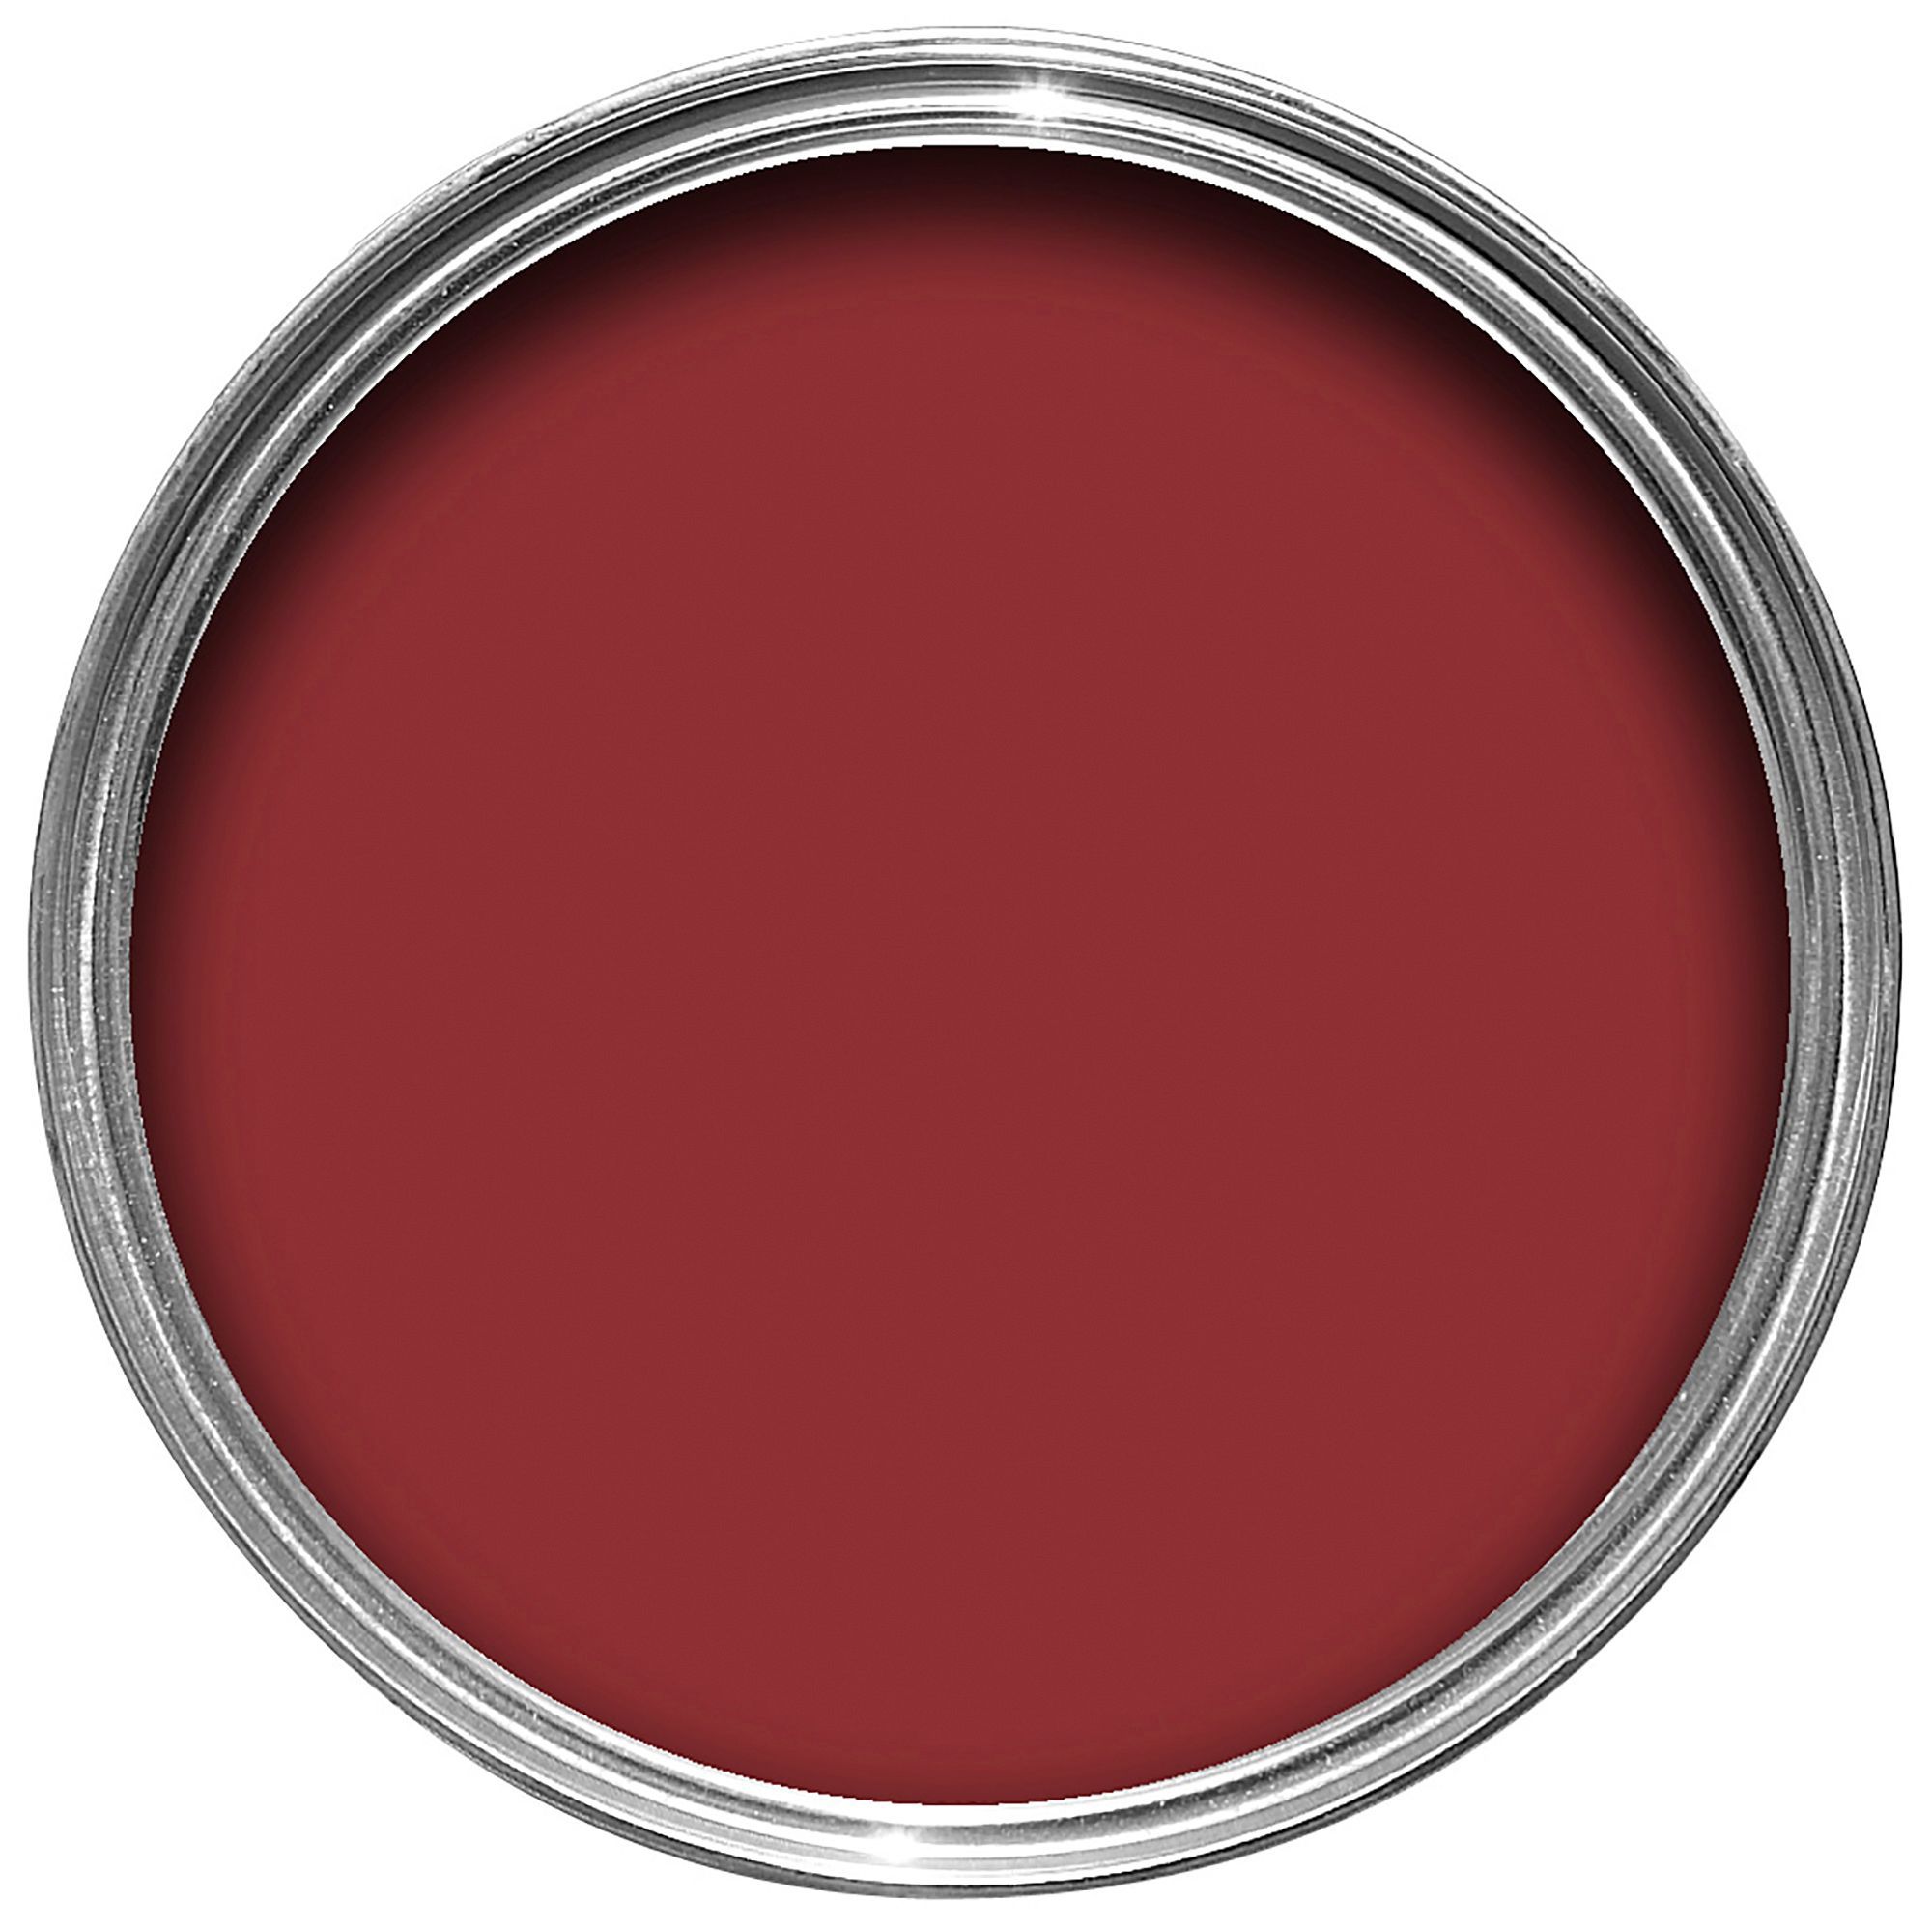 Colours Classic Red Gloss Metal Wood Paint 0 75l~5397007071108 01c?$MOB PREV$&$width=768&$height=768